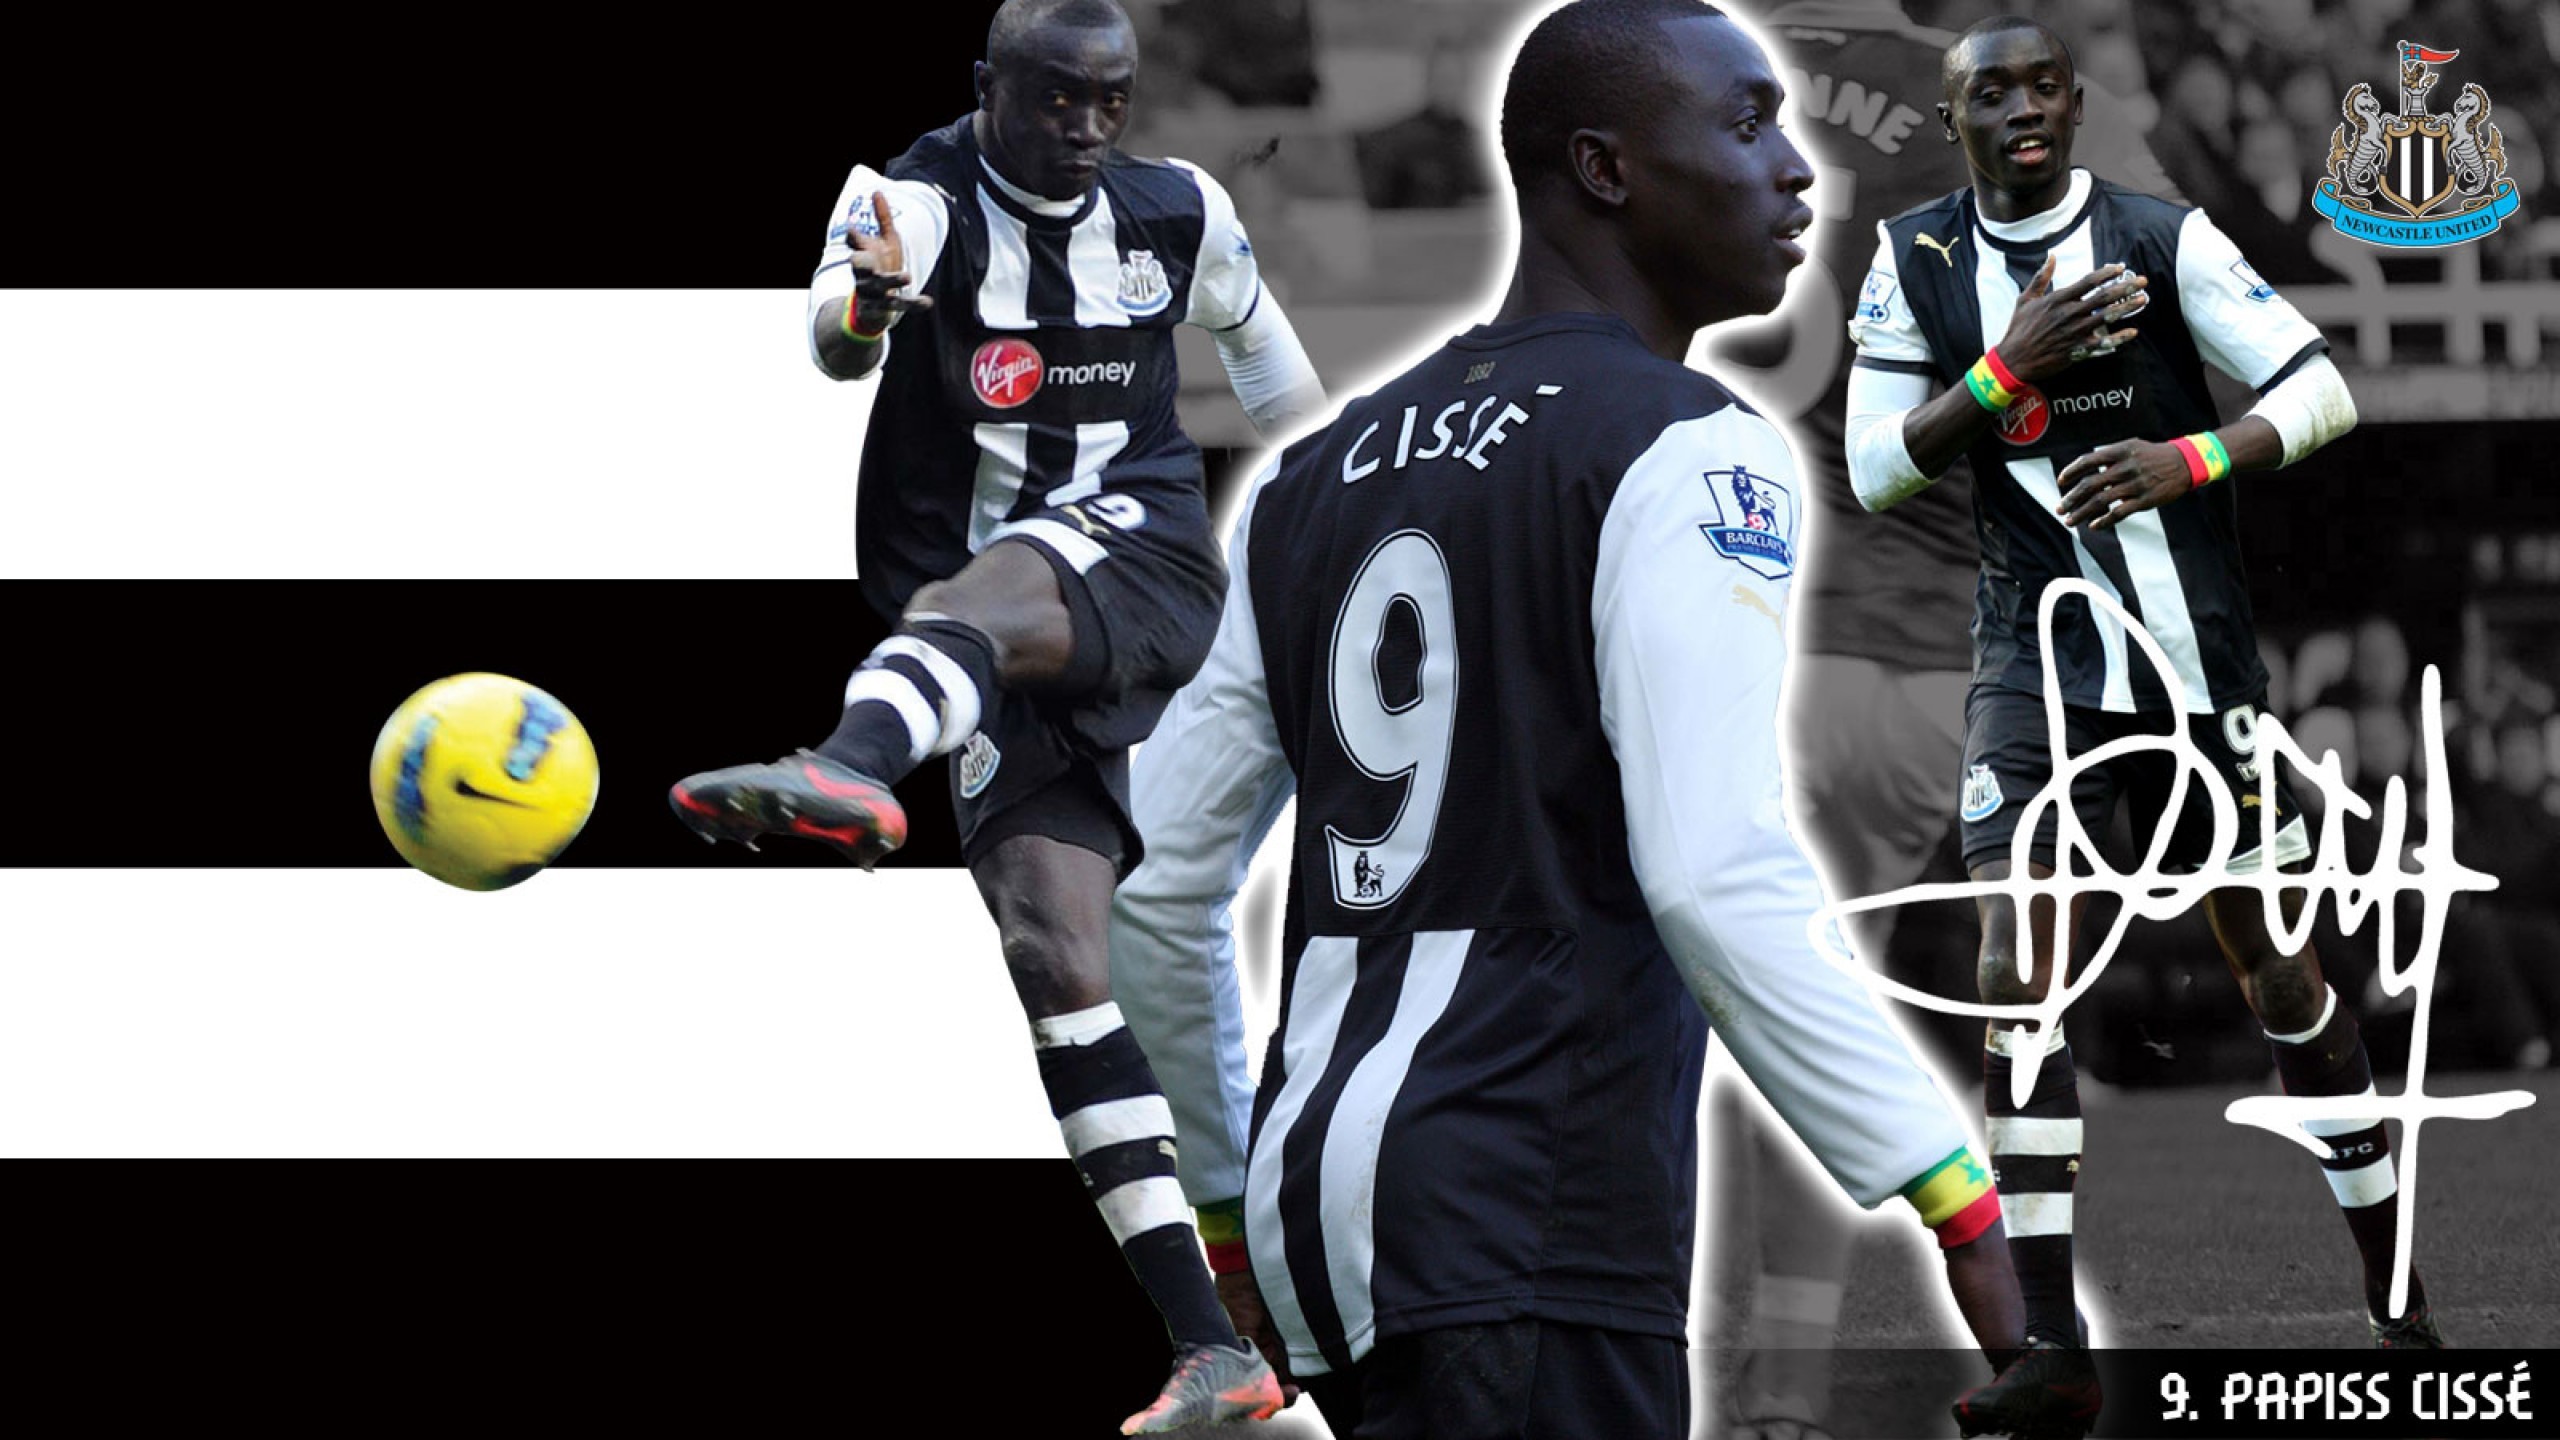 The por football team england newcastle united wallpapers and other